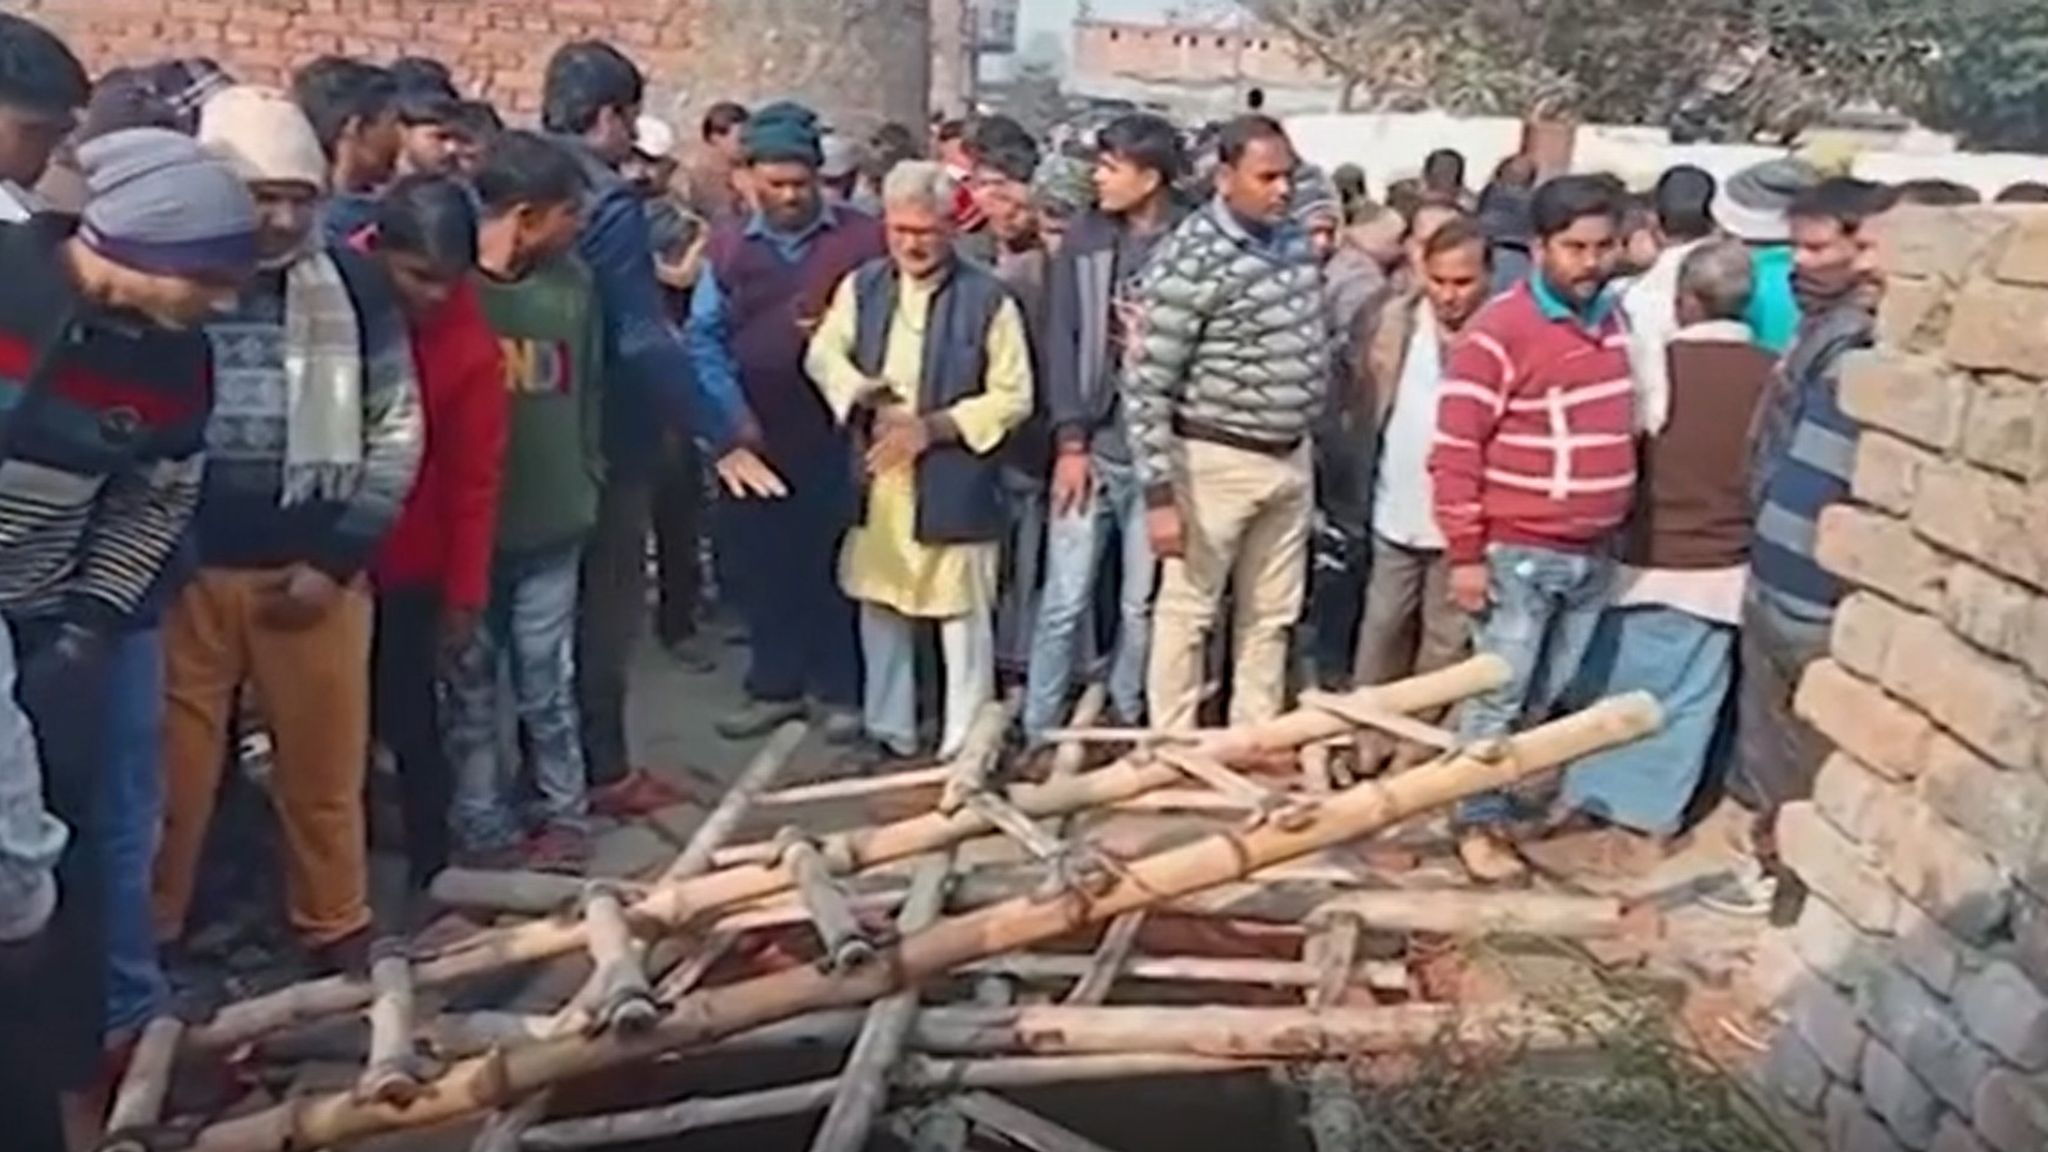 13 die in village well collapse at wedding in India